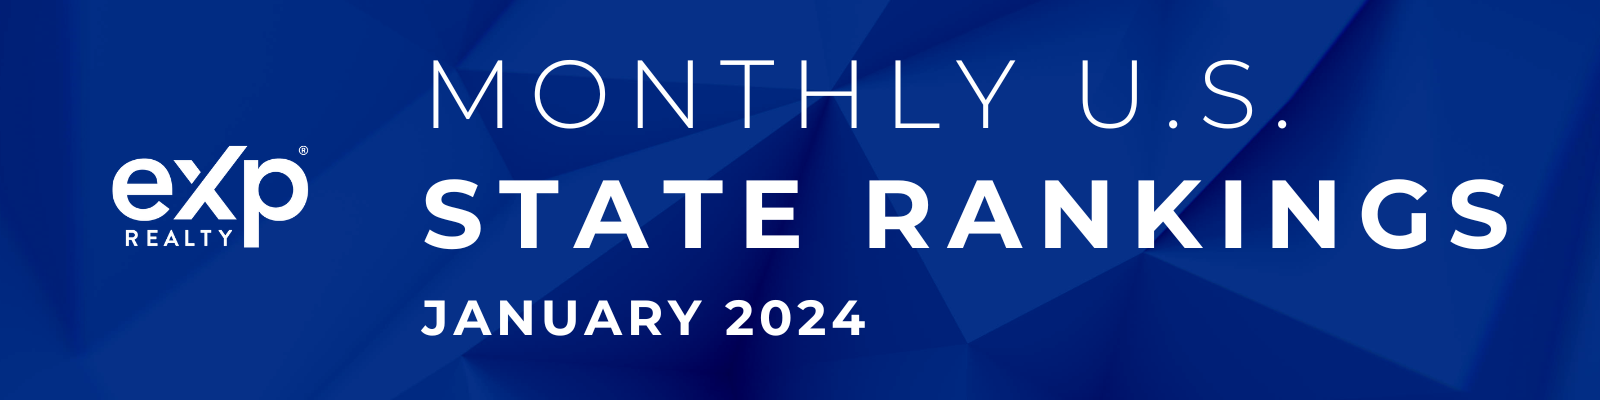 January 2024 State rankings exp realty